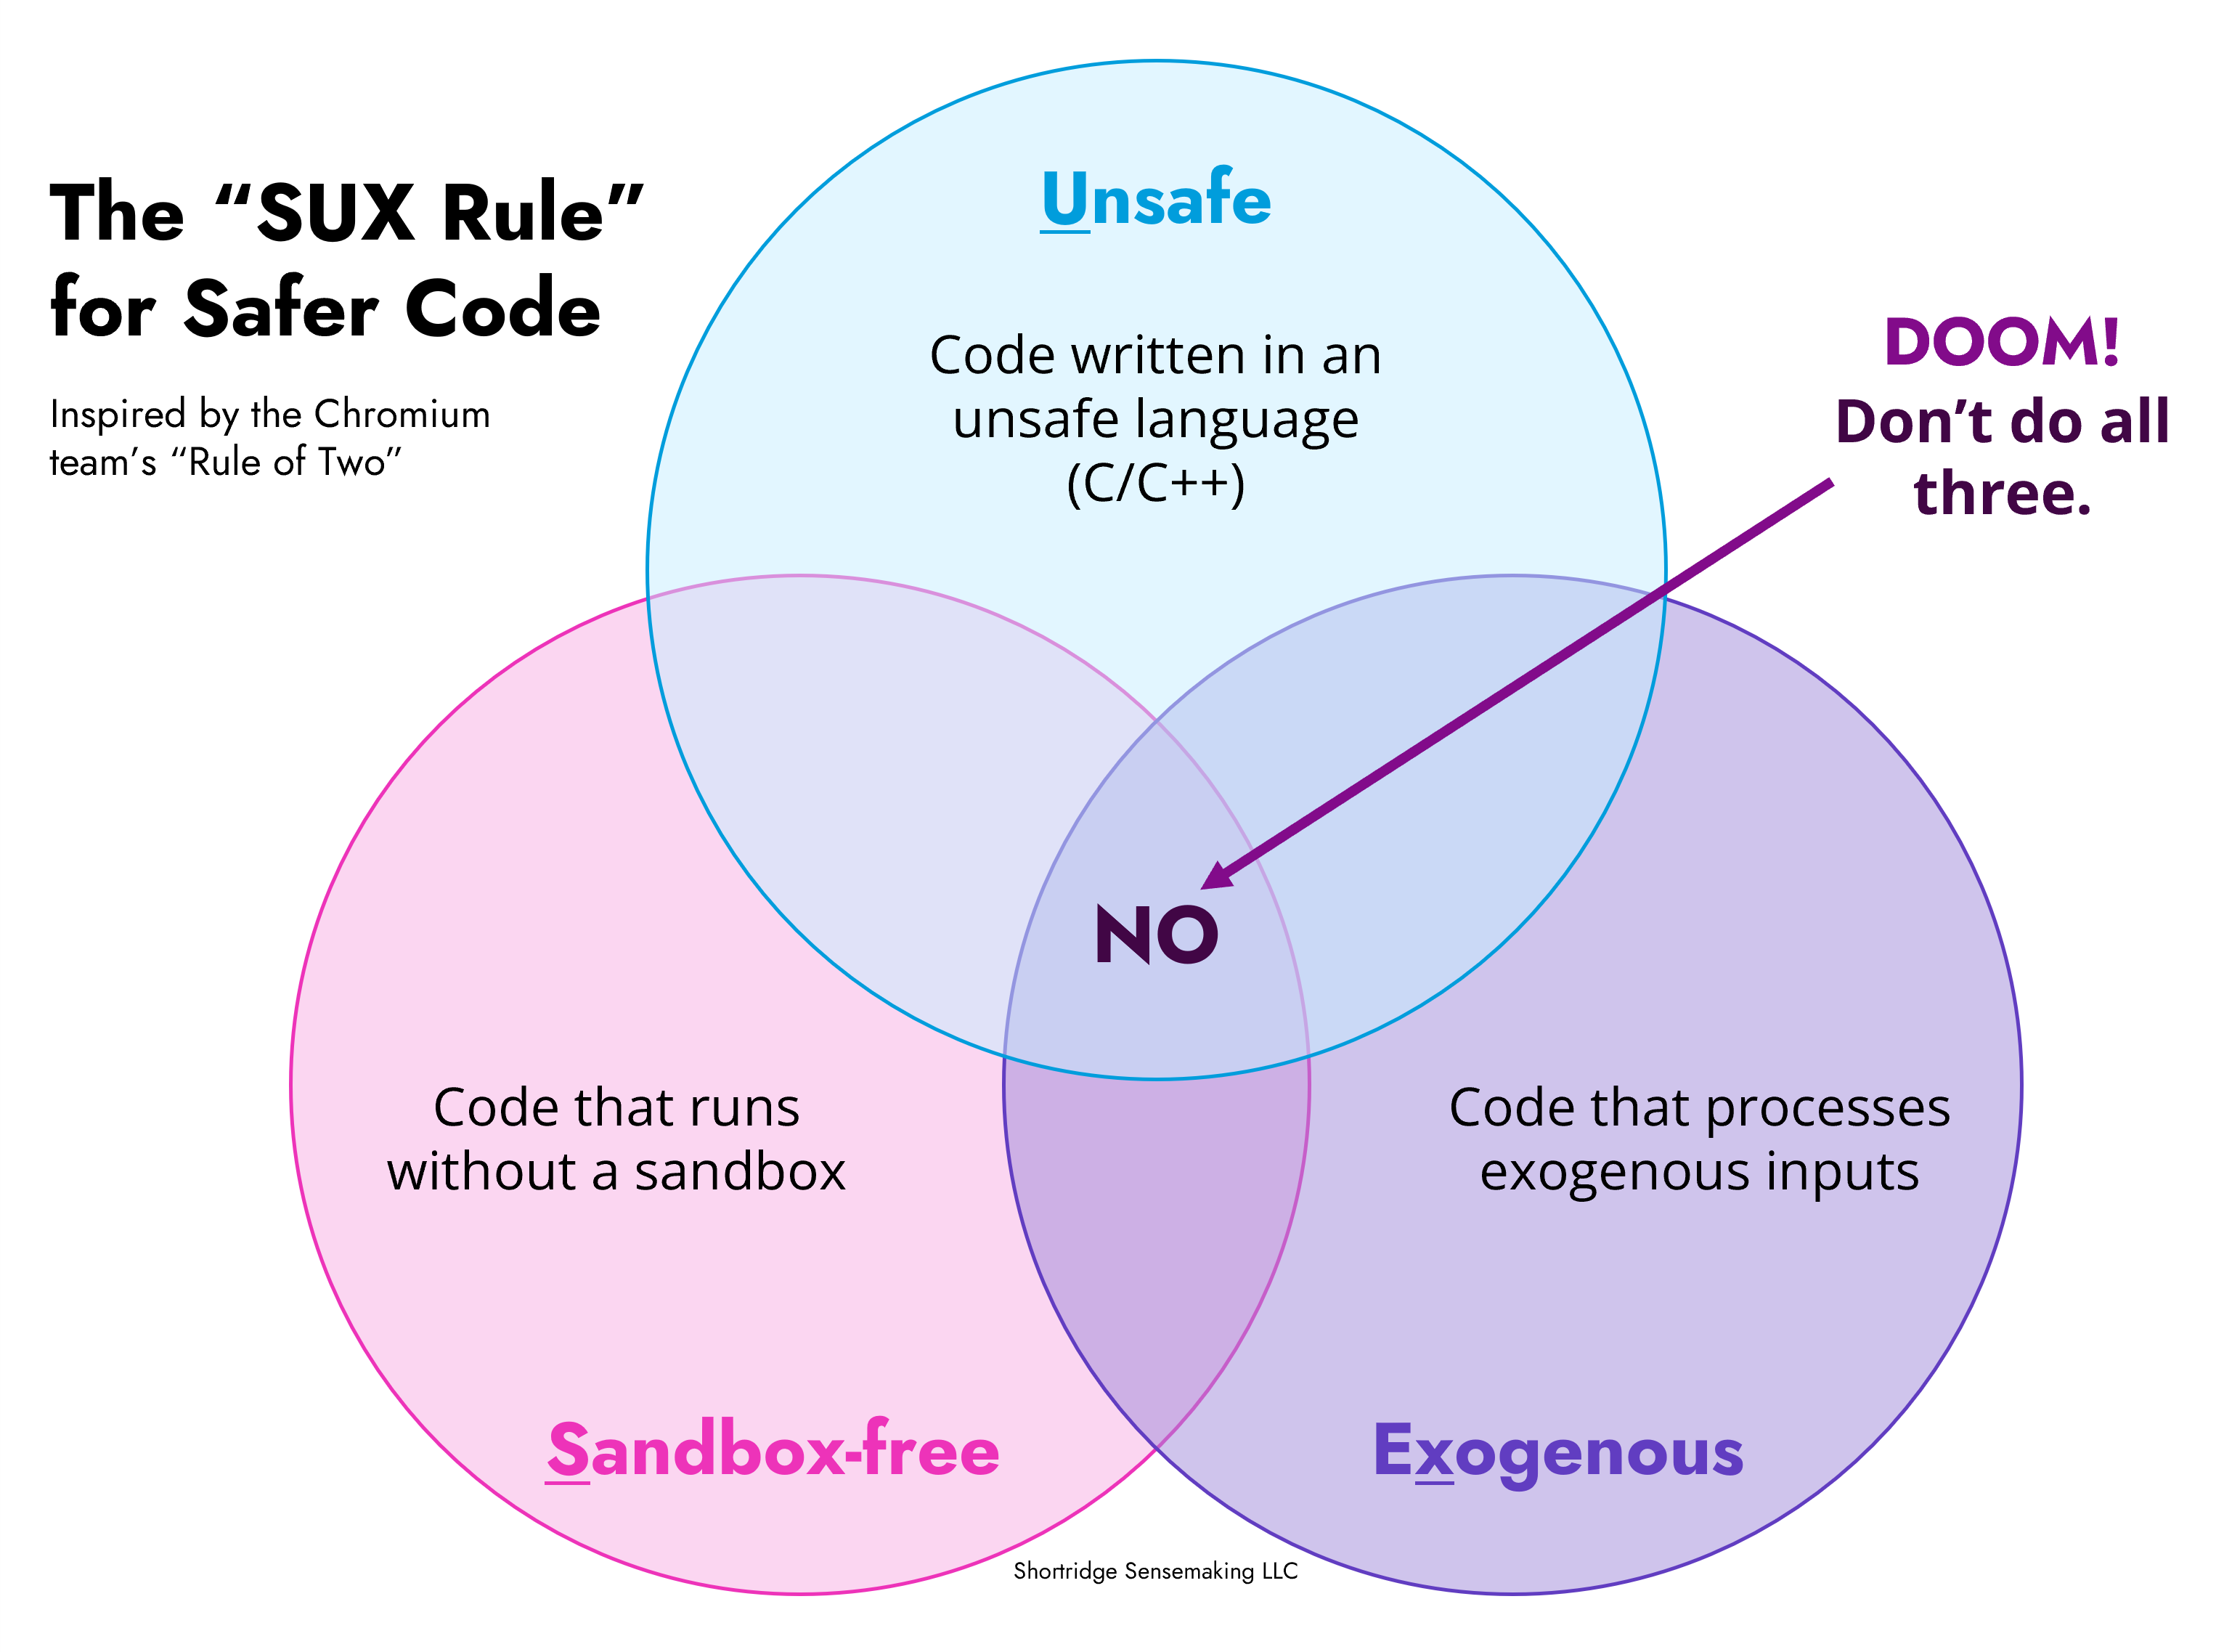 Venn diagram of the sux rule showing you should always use a safe language, isolate the code in a sandbox, or not process exogenous inputs. The intersection of sandbox-free, unsafe, and exogenous is labeled NO and an arrow points to it saying Doom! Don&rsquo;t do all three.